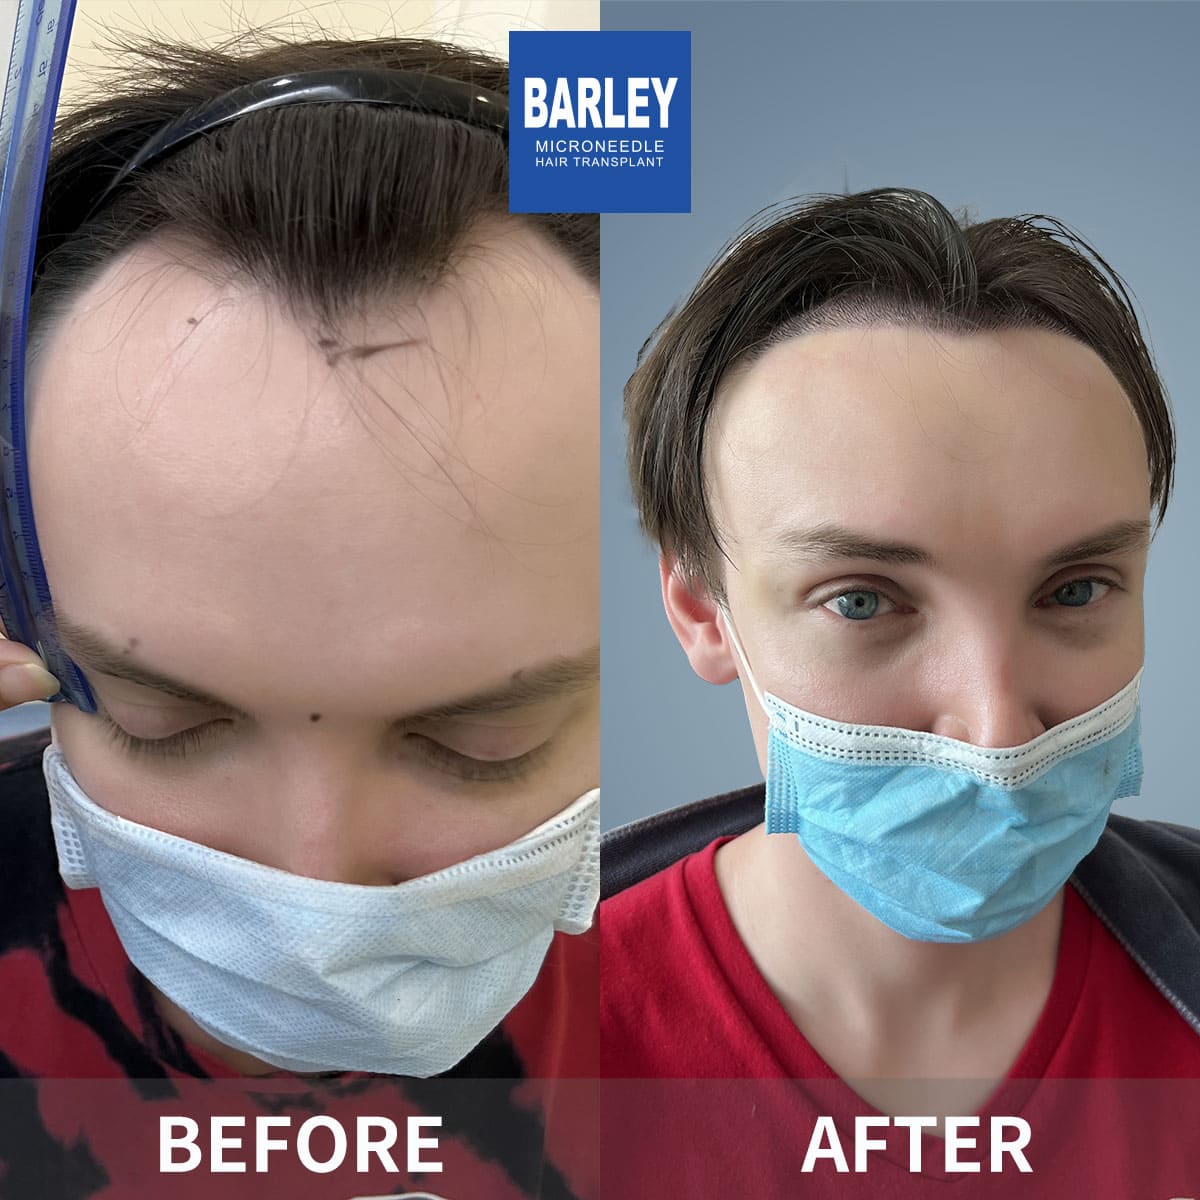 hair transplant after 10 years